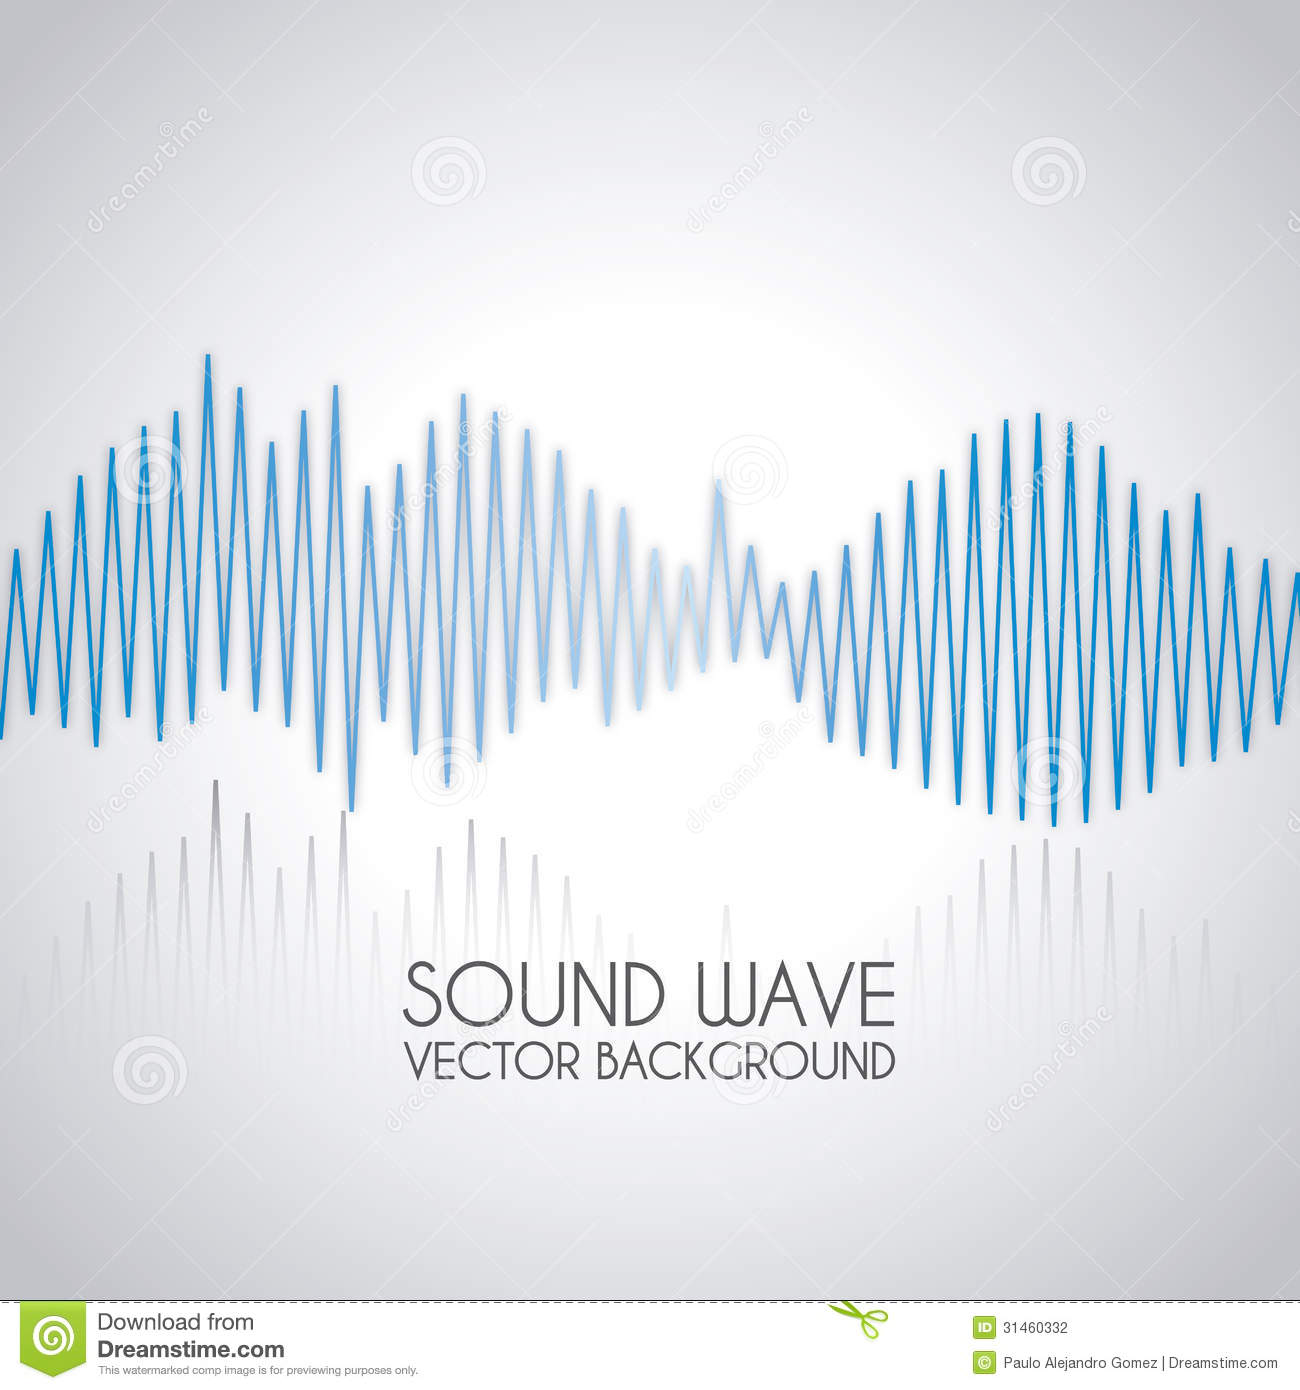 Sound Waves Vector Free